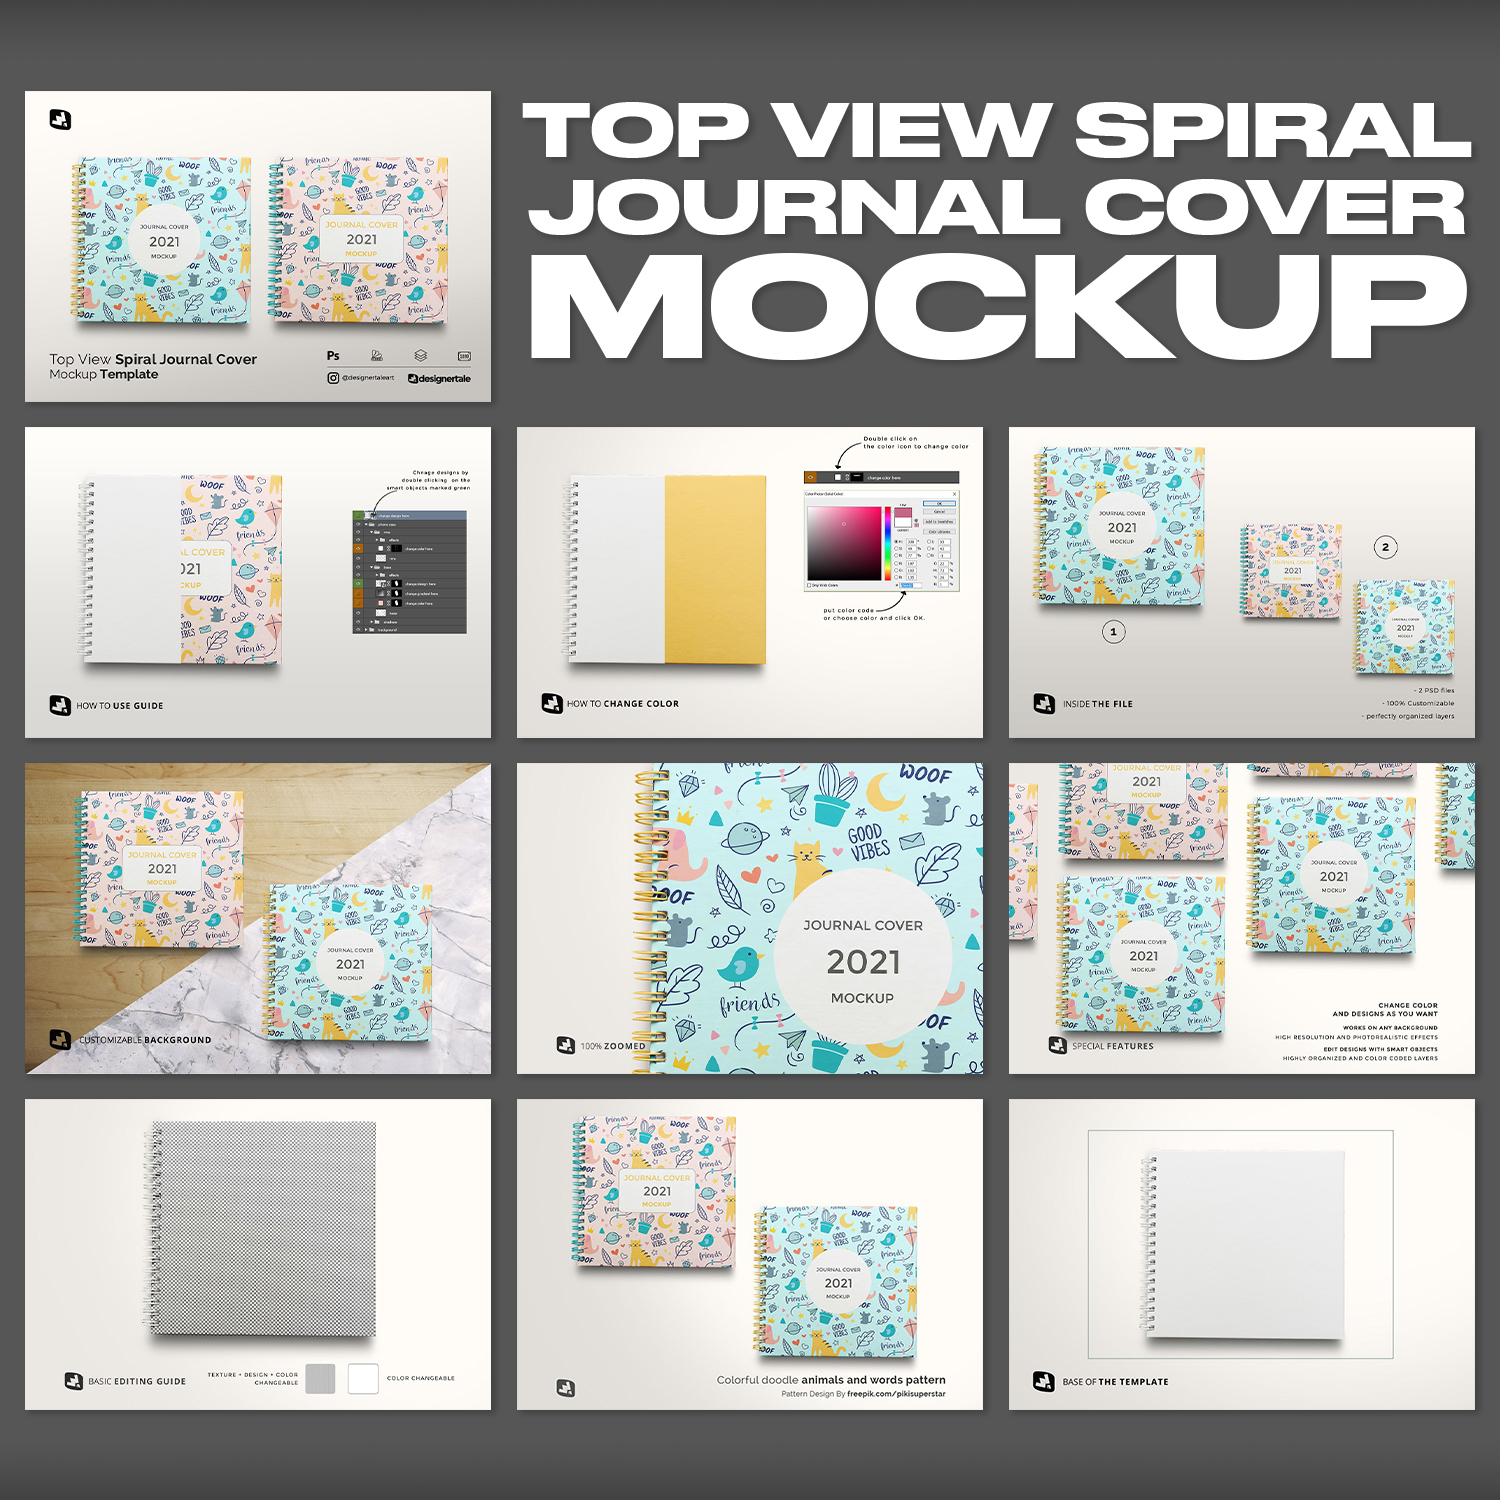 Top View Spiral Journal Cover Mockup.